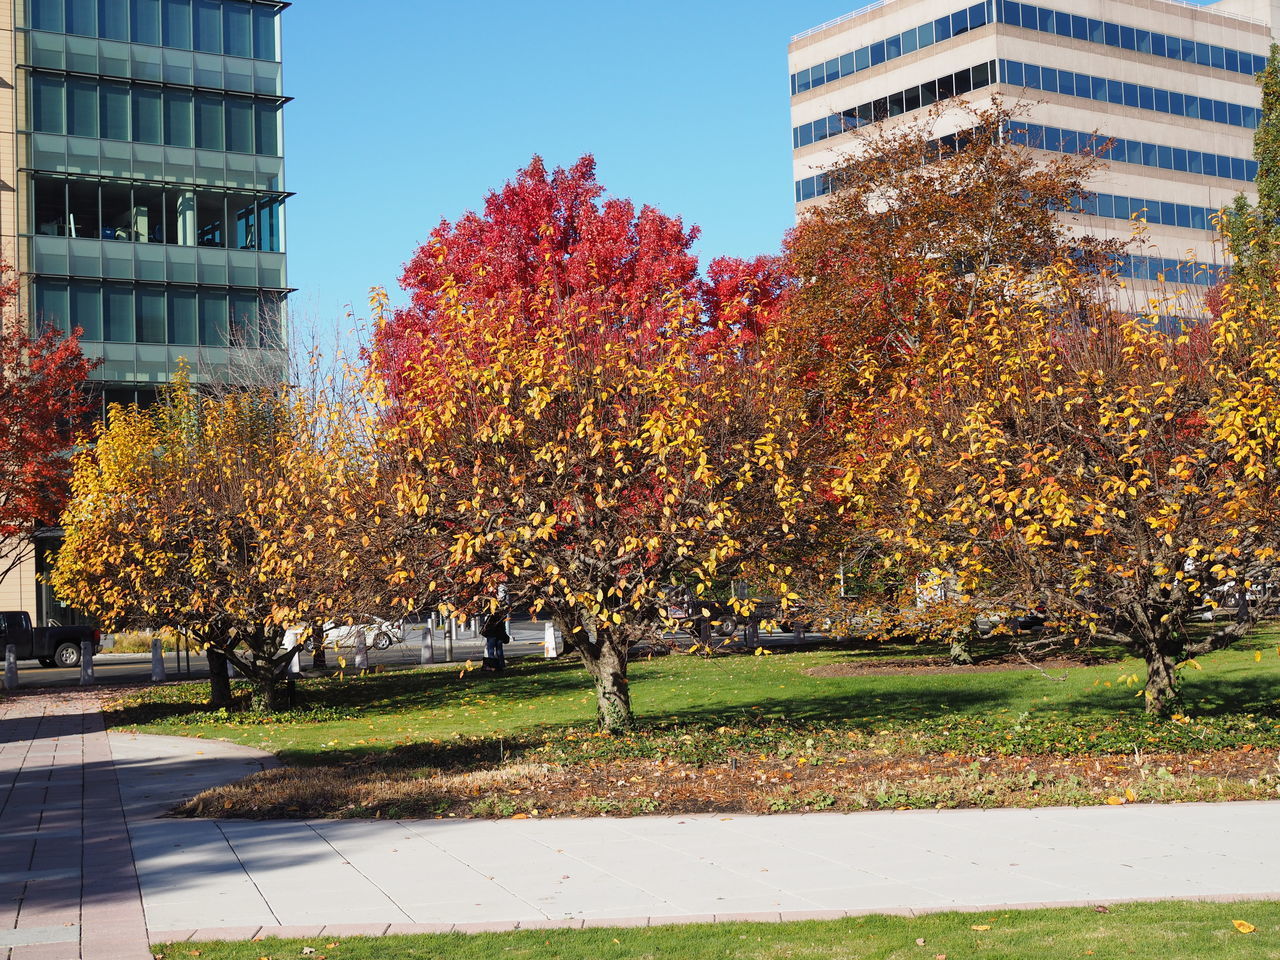 TREES AND PLANTS IN PARK DURING AUTUMN AGAINST BUILDINGS